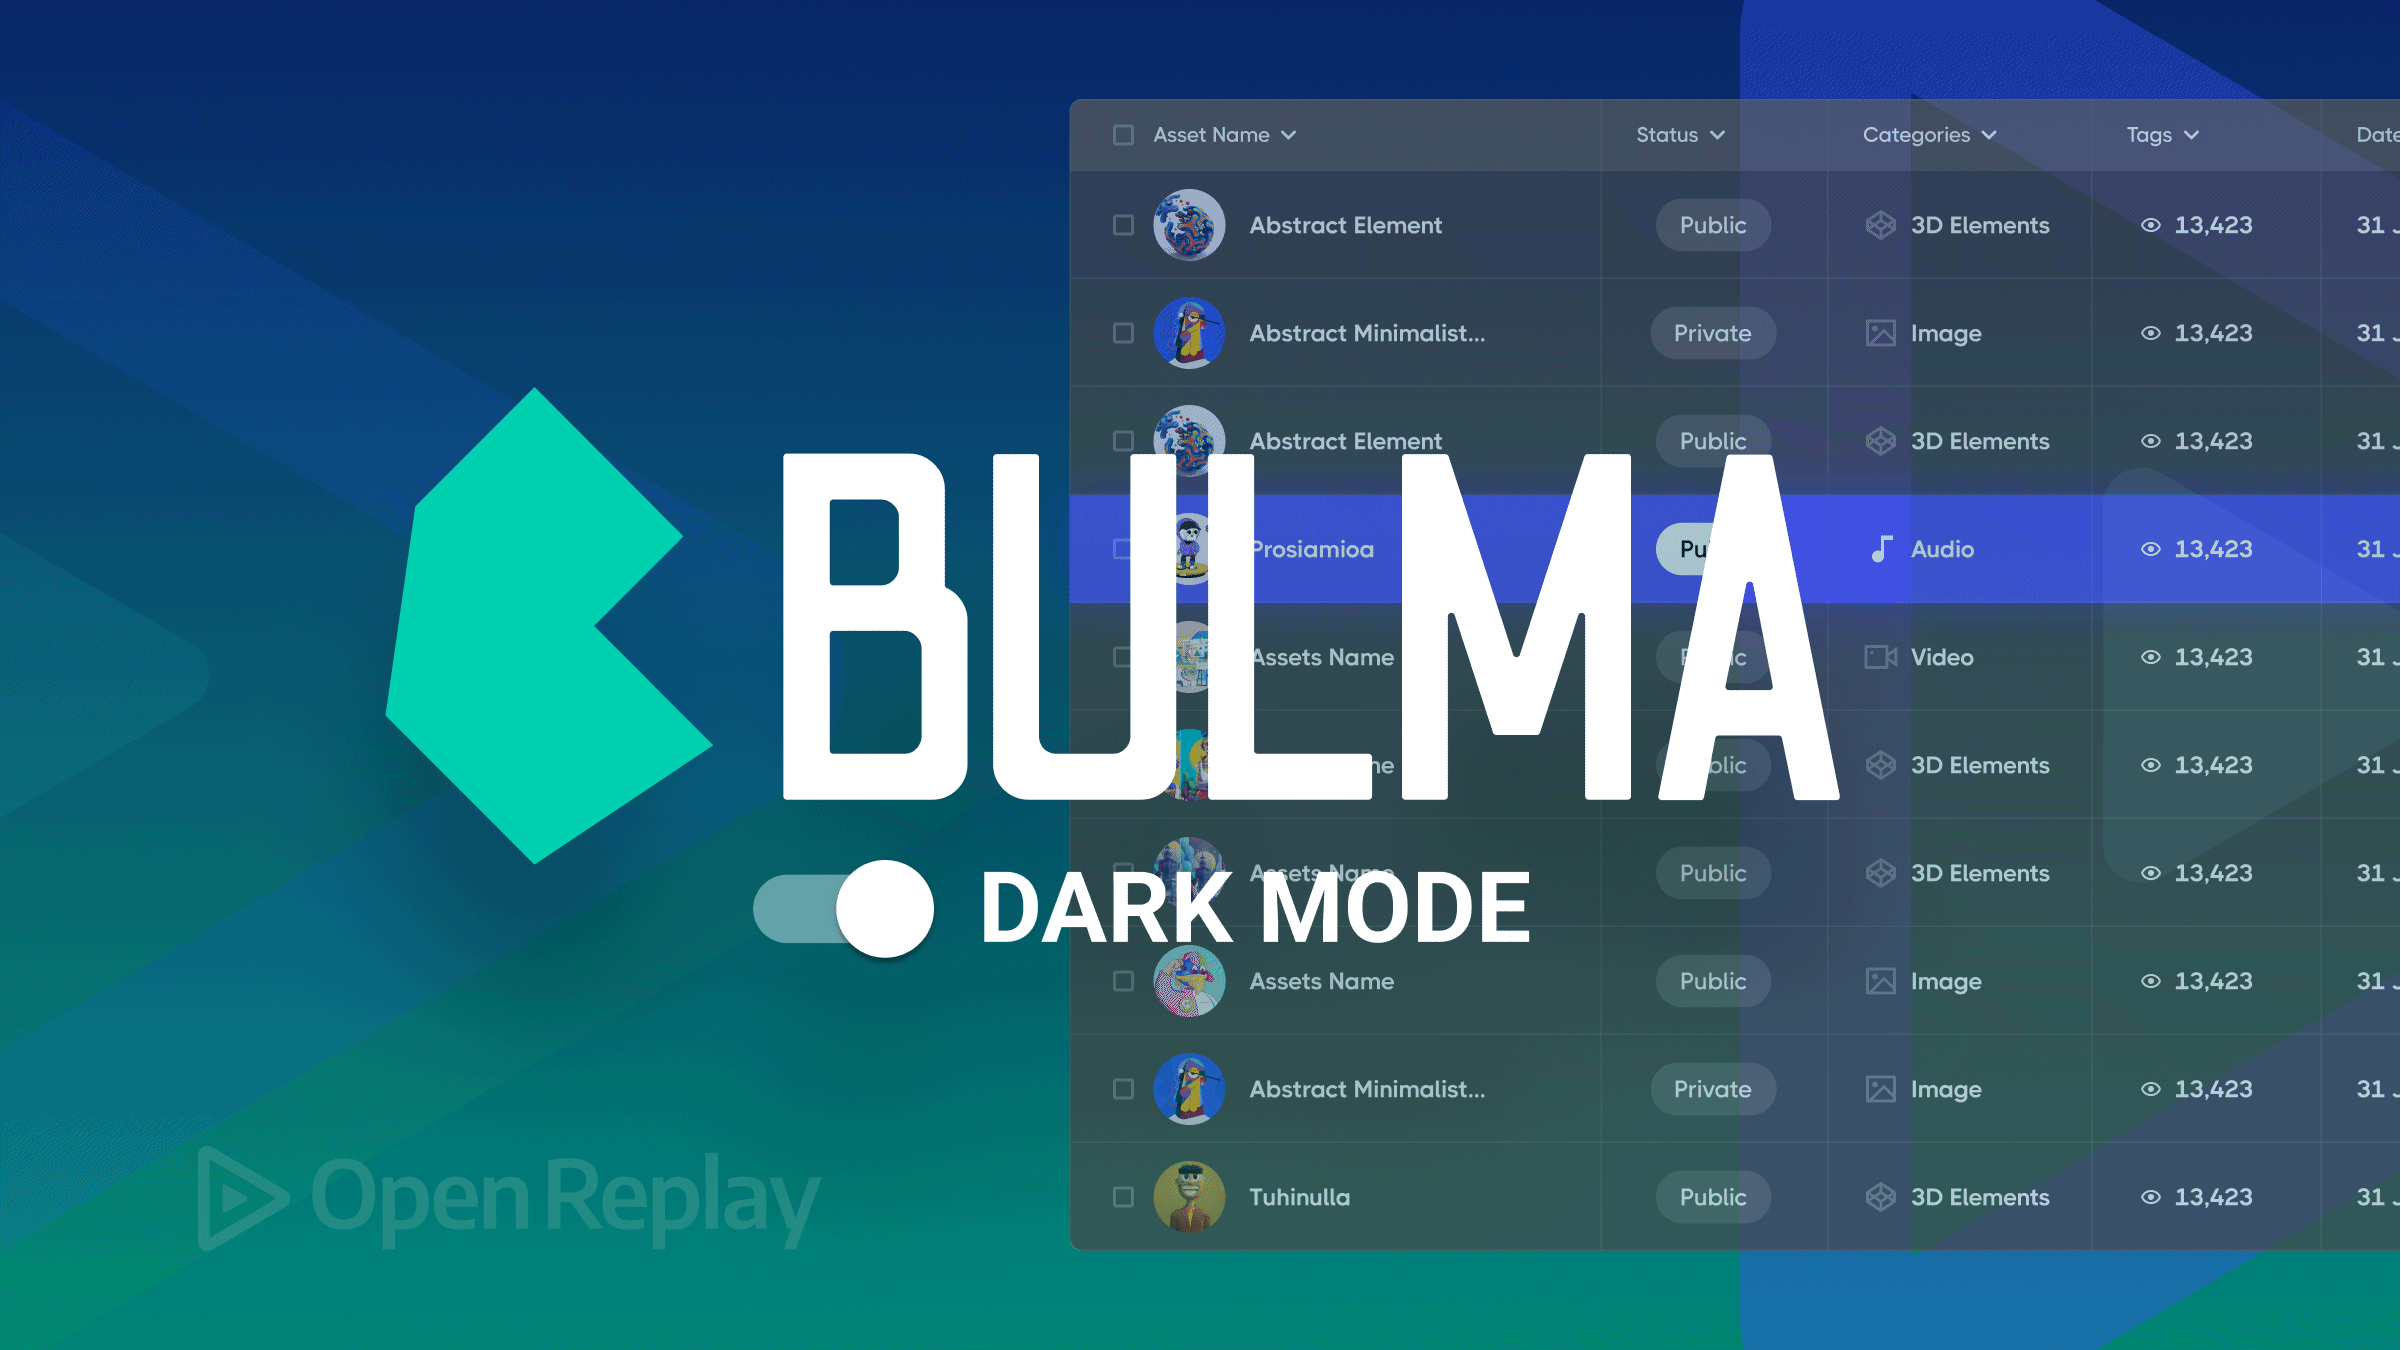 Implementing Dark Mode with Bulma